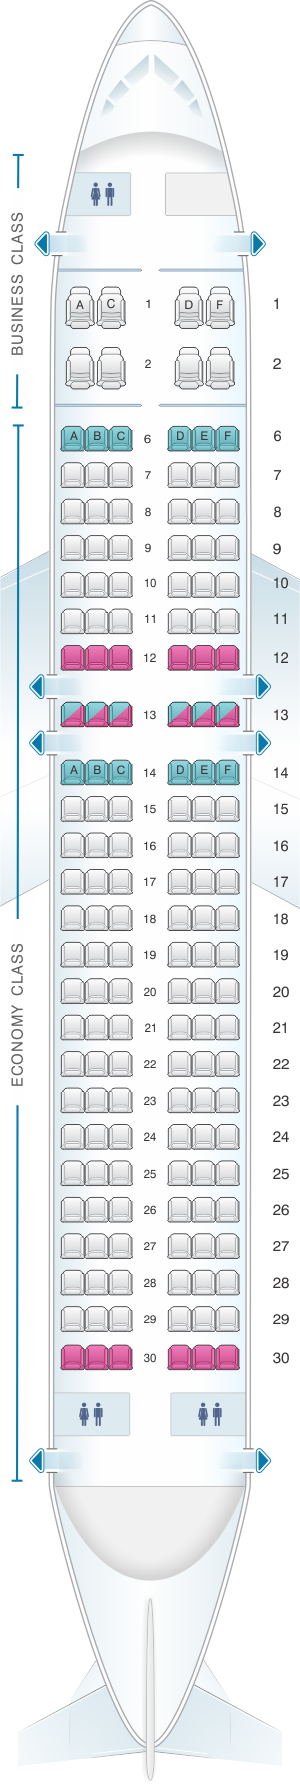 Seat map for Aeroflot Russian Airlines Airbus A320 200 Config.2